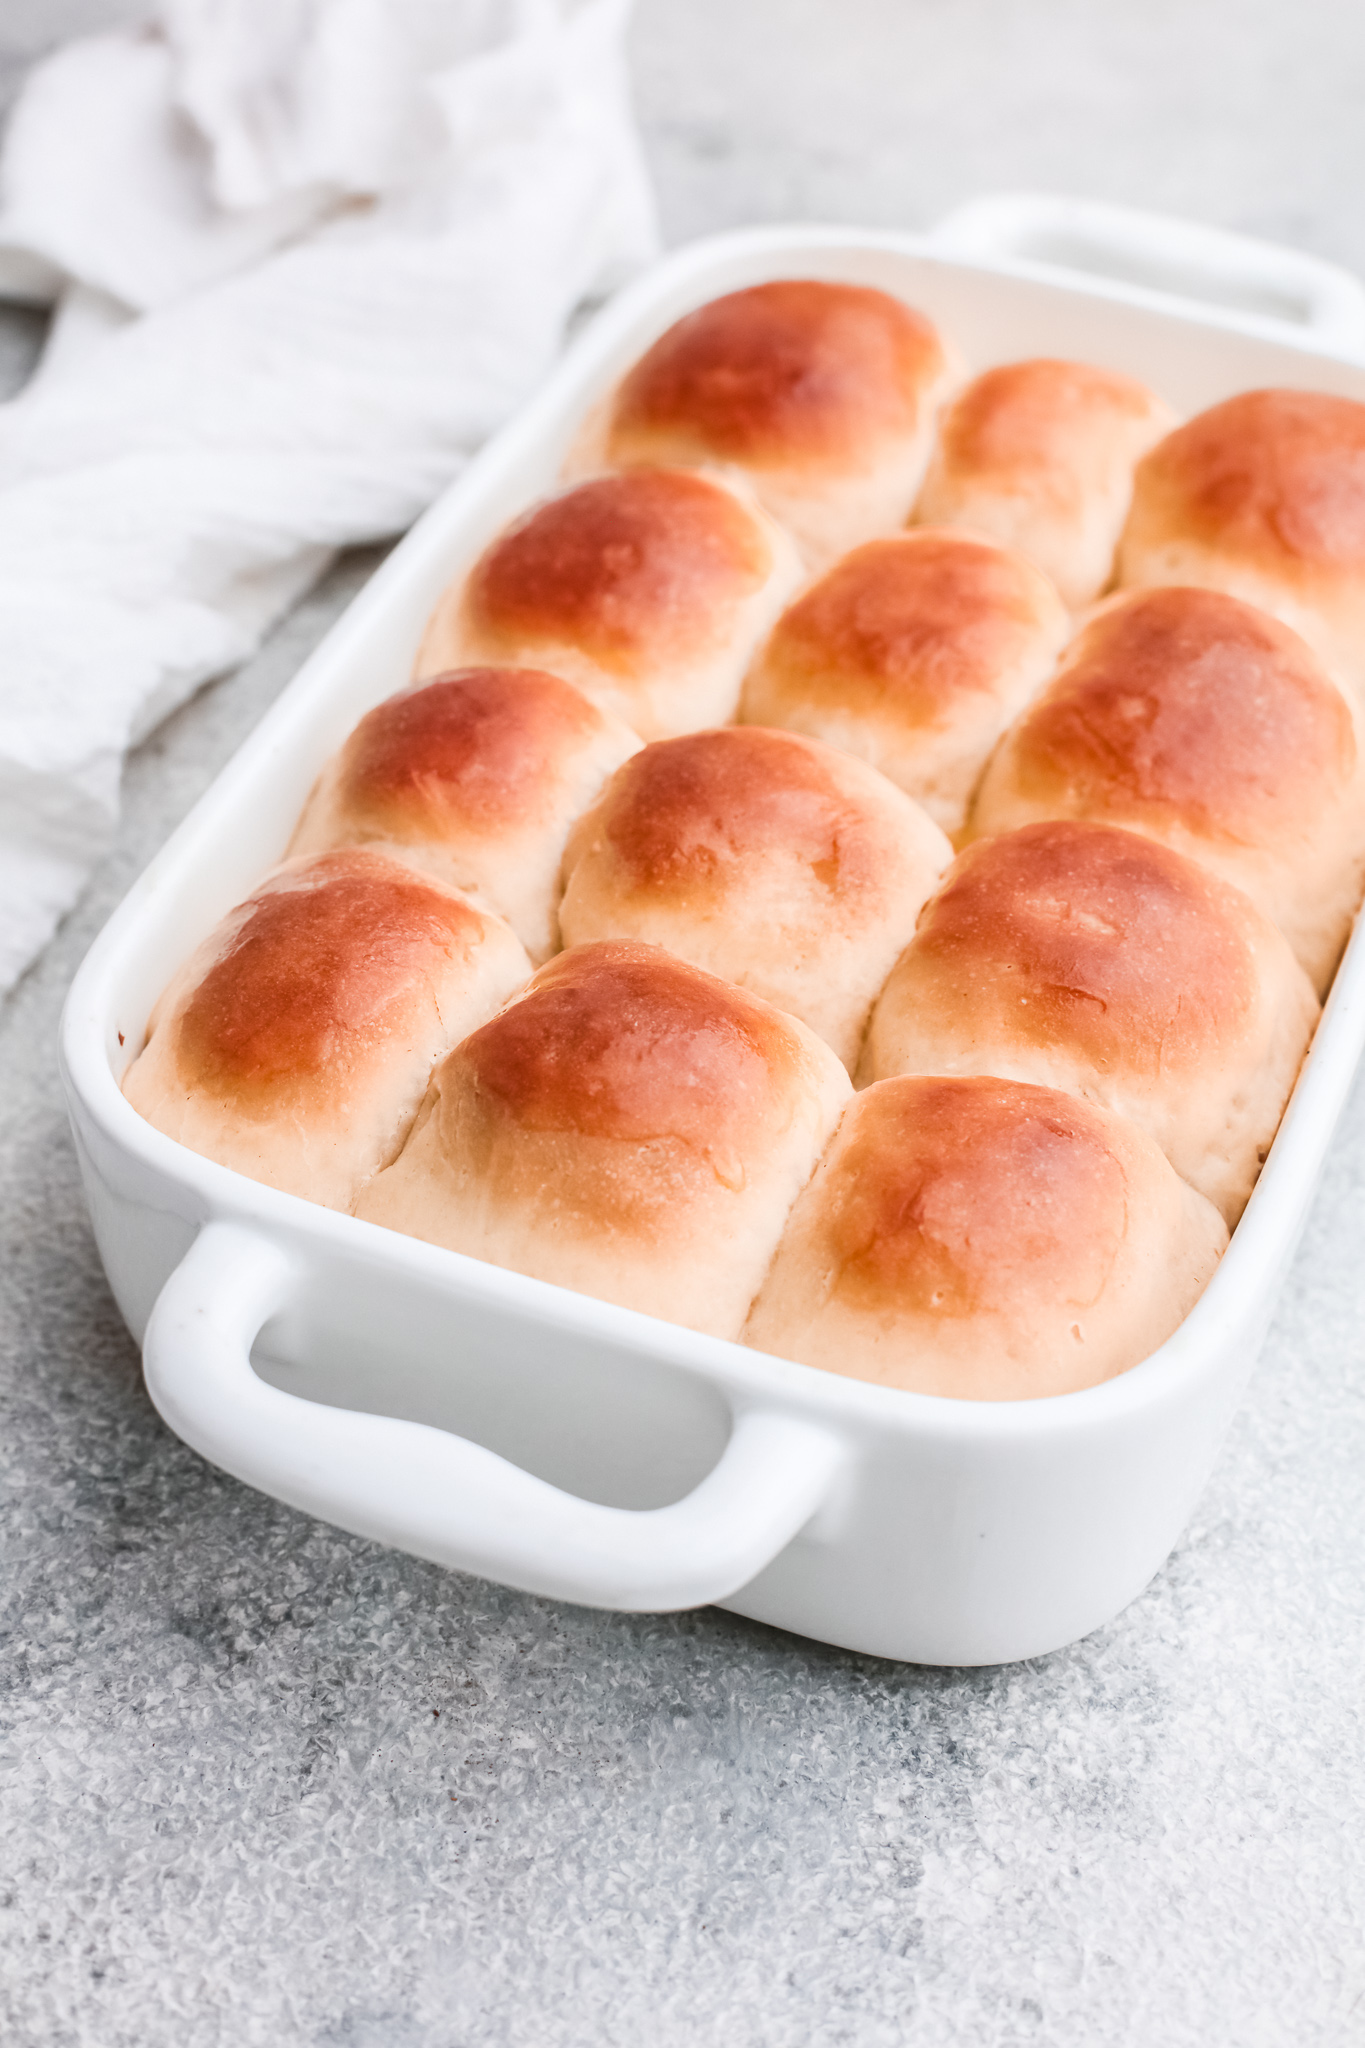 the finished easy yeast rolls ready to be served